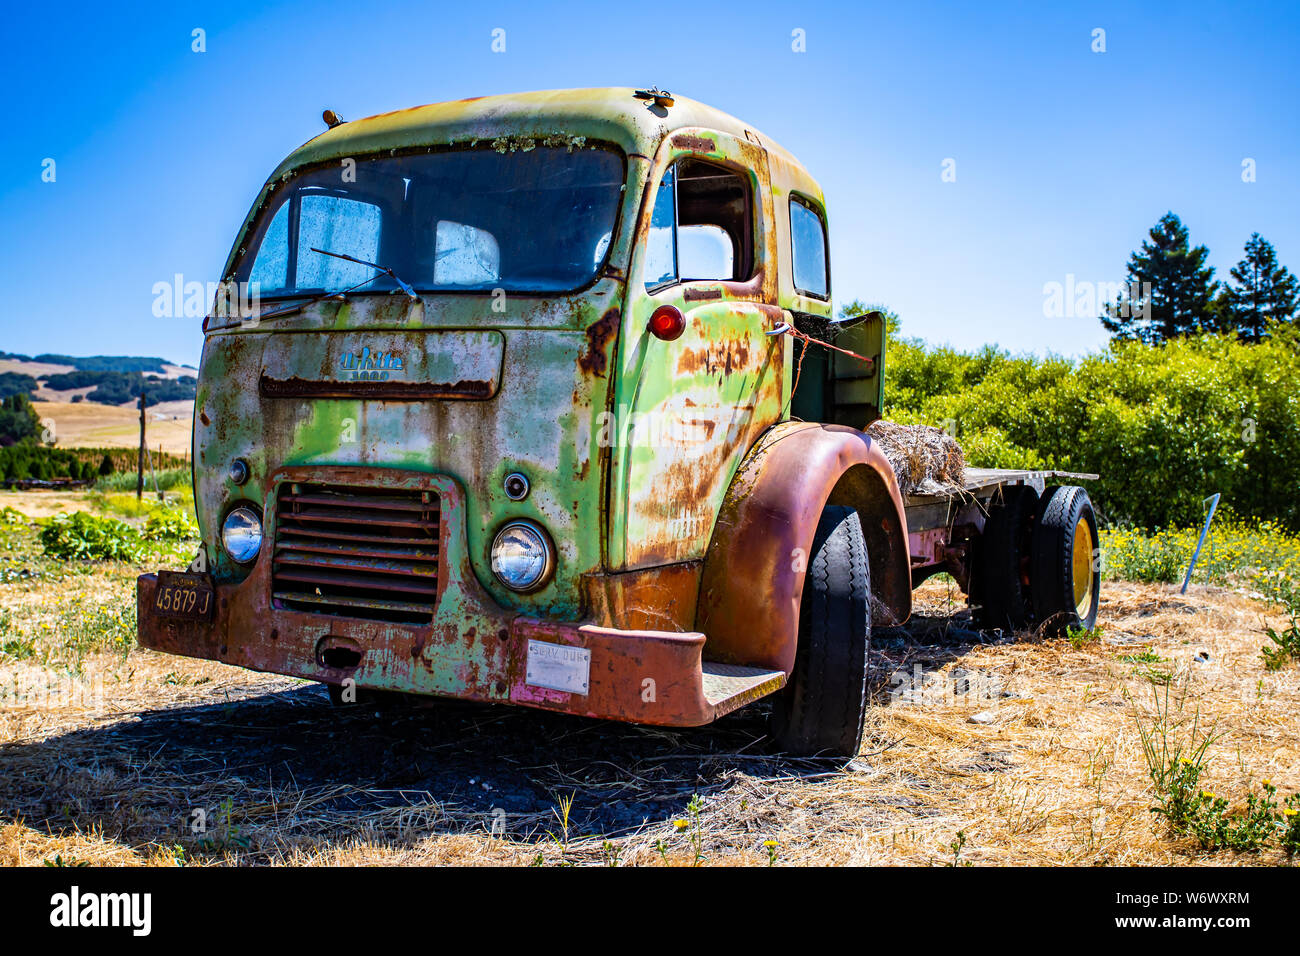 Abandoned old trucks are left in fields along Adobe Road, Sonoma, California Stock Photo